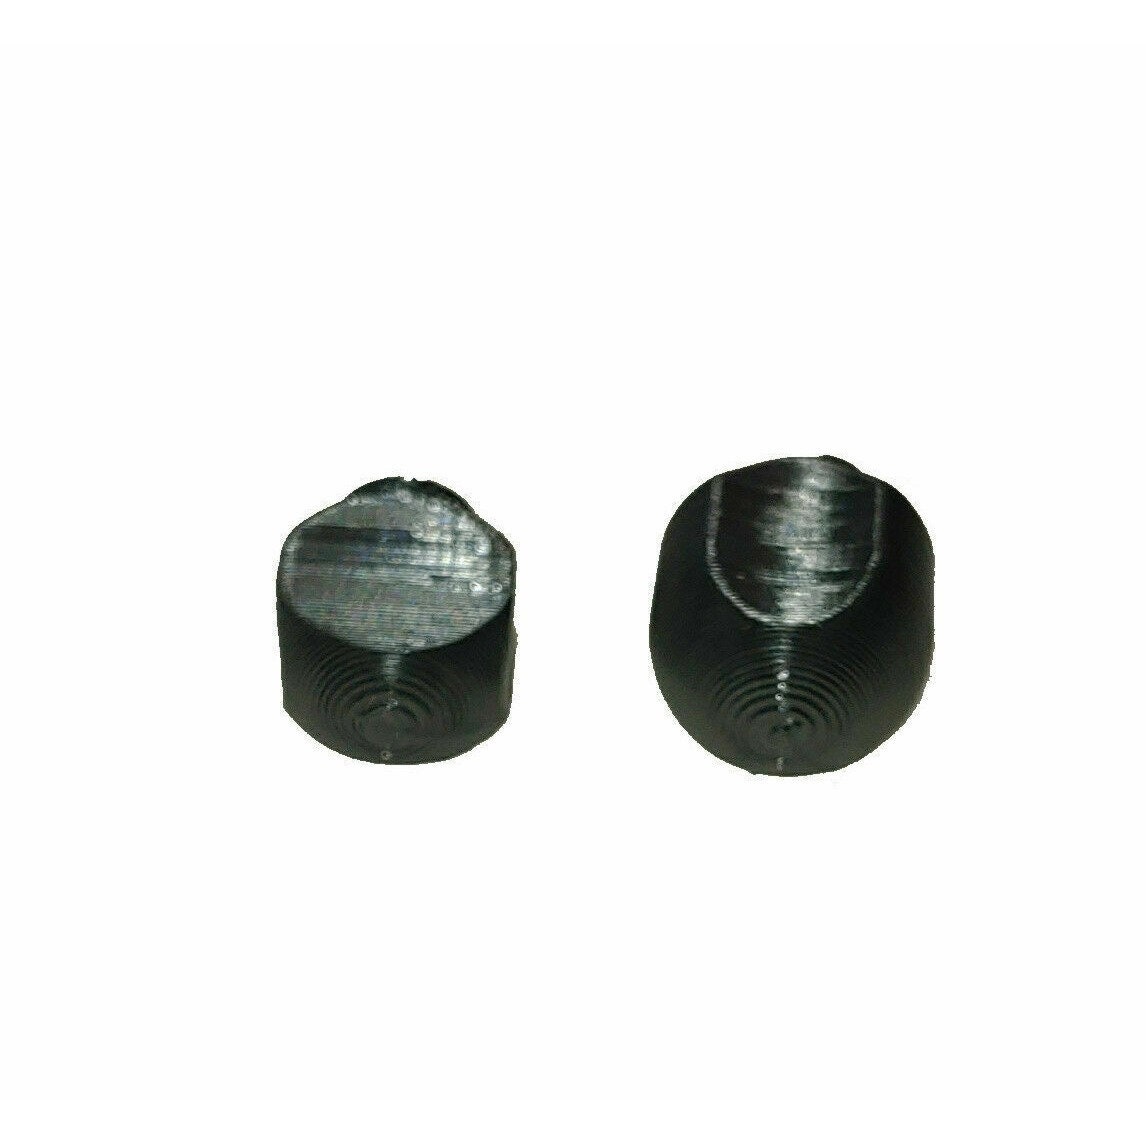 Lock and Speed Knob parts for KitchenAid Stand Mixer Aftermarket